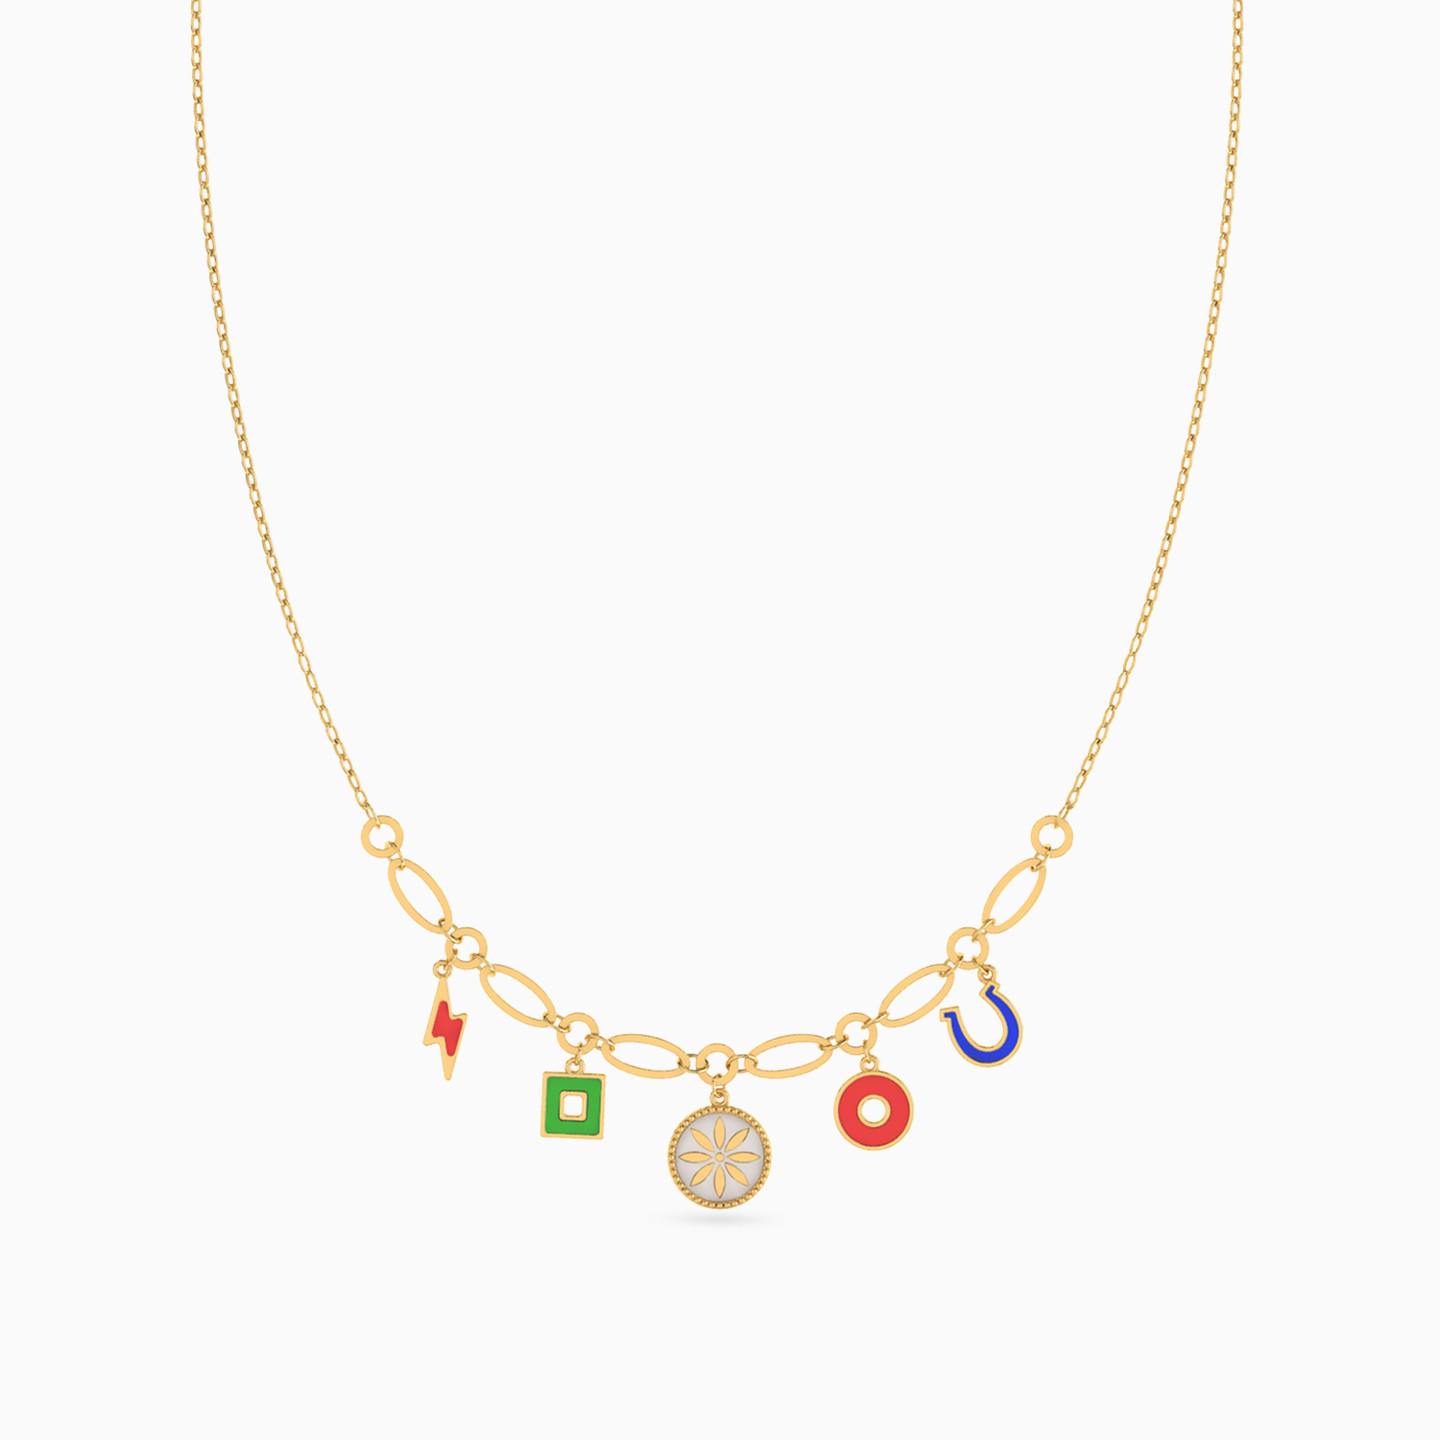 18K Gold Colored Stones Chain Necklace - 3